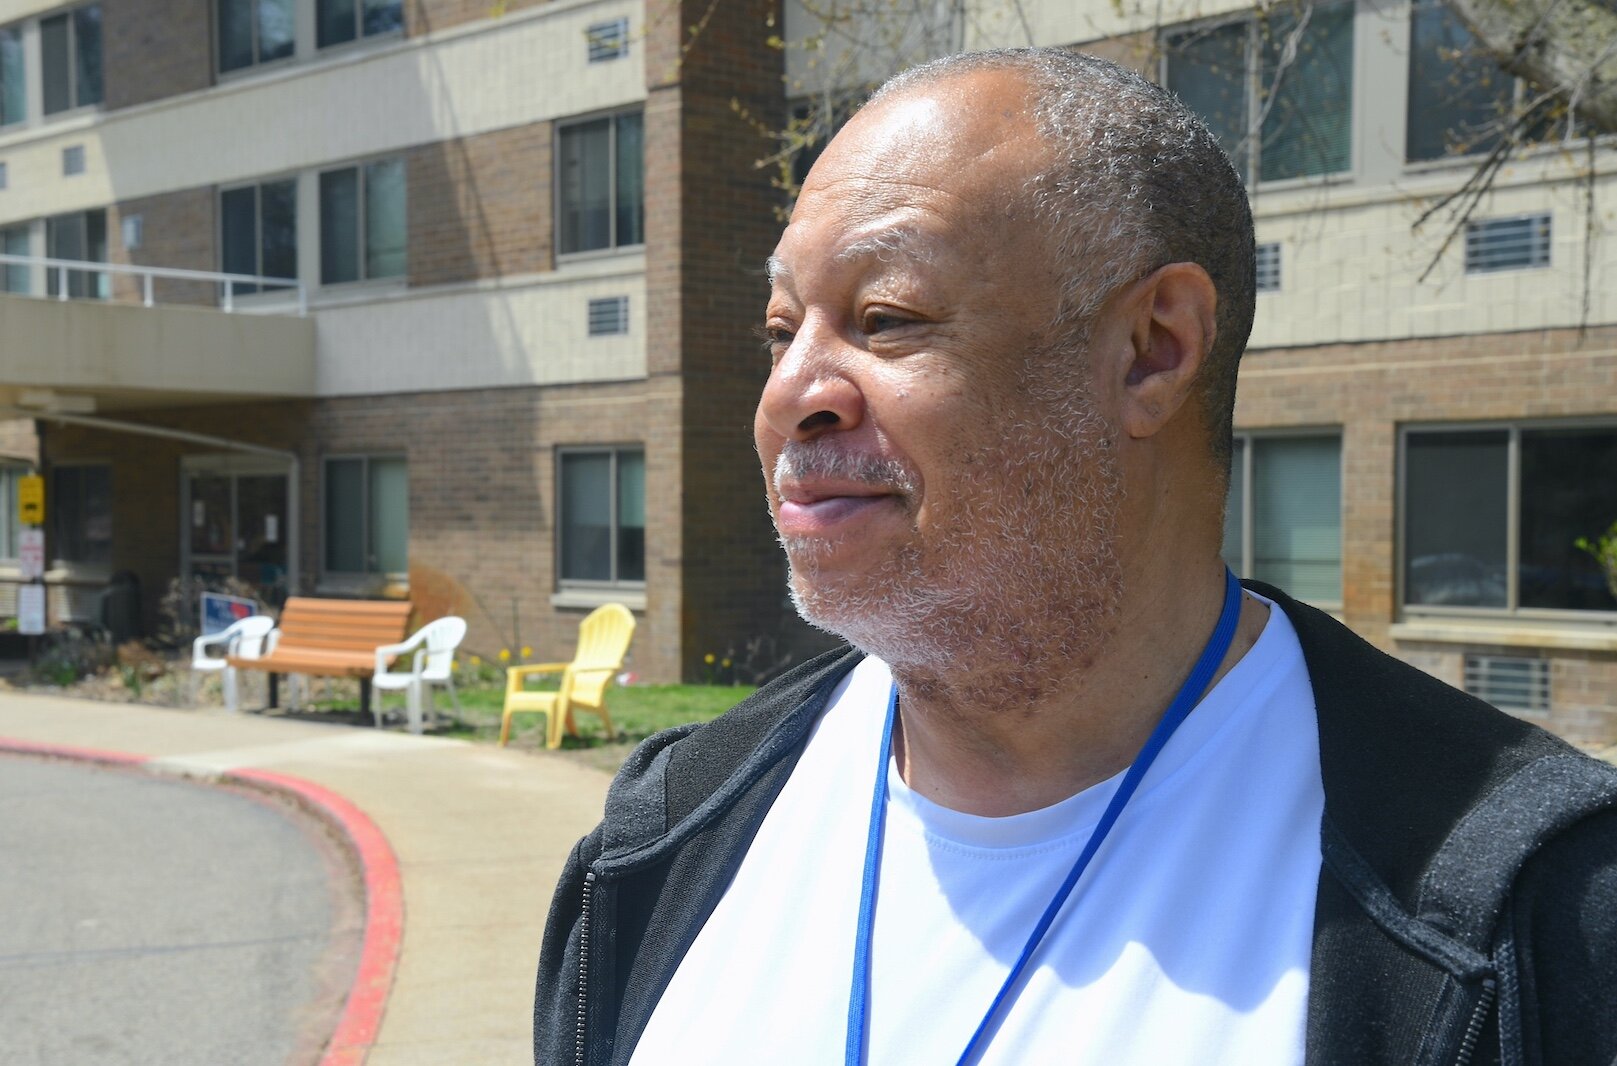 Lowell Wilson stands outside the Springview Tower apartment complex.